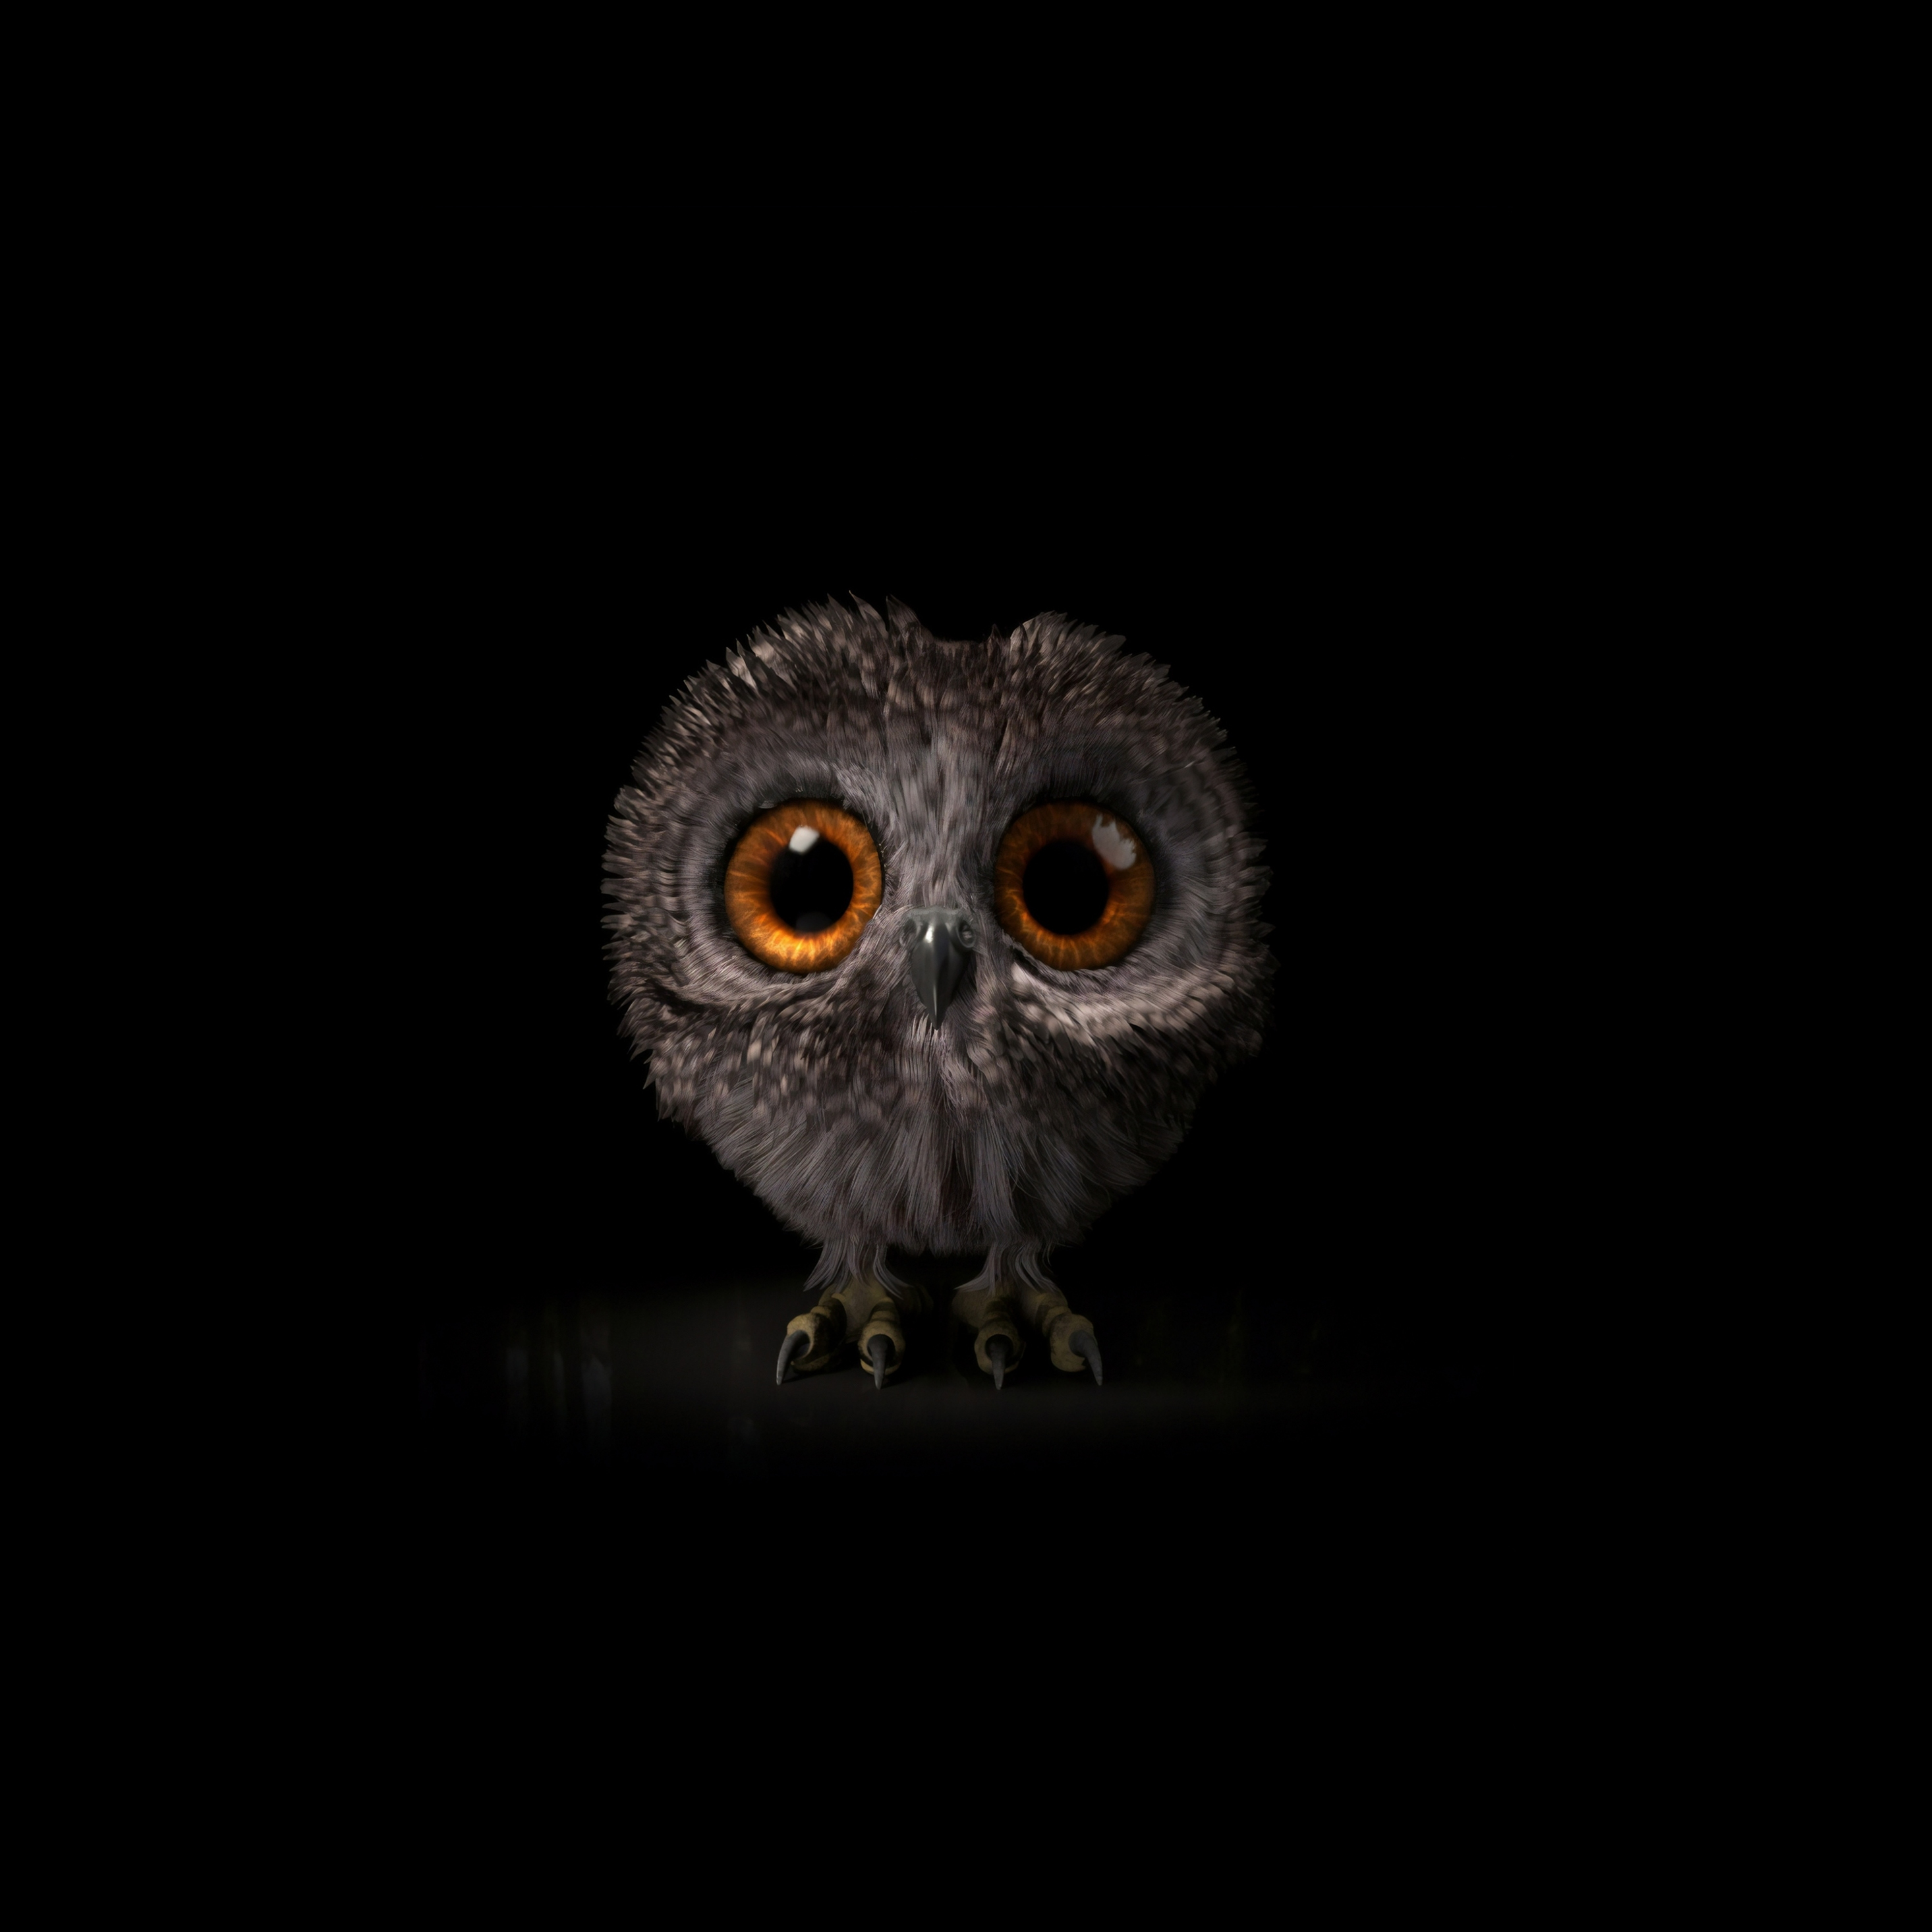 Download wallpaper 2932x2932 pinfeather, fluffy owl, cute and adorable, ipad  pro retina, 2932x2932 hd background, 21924